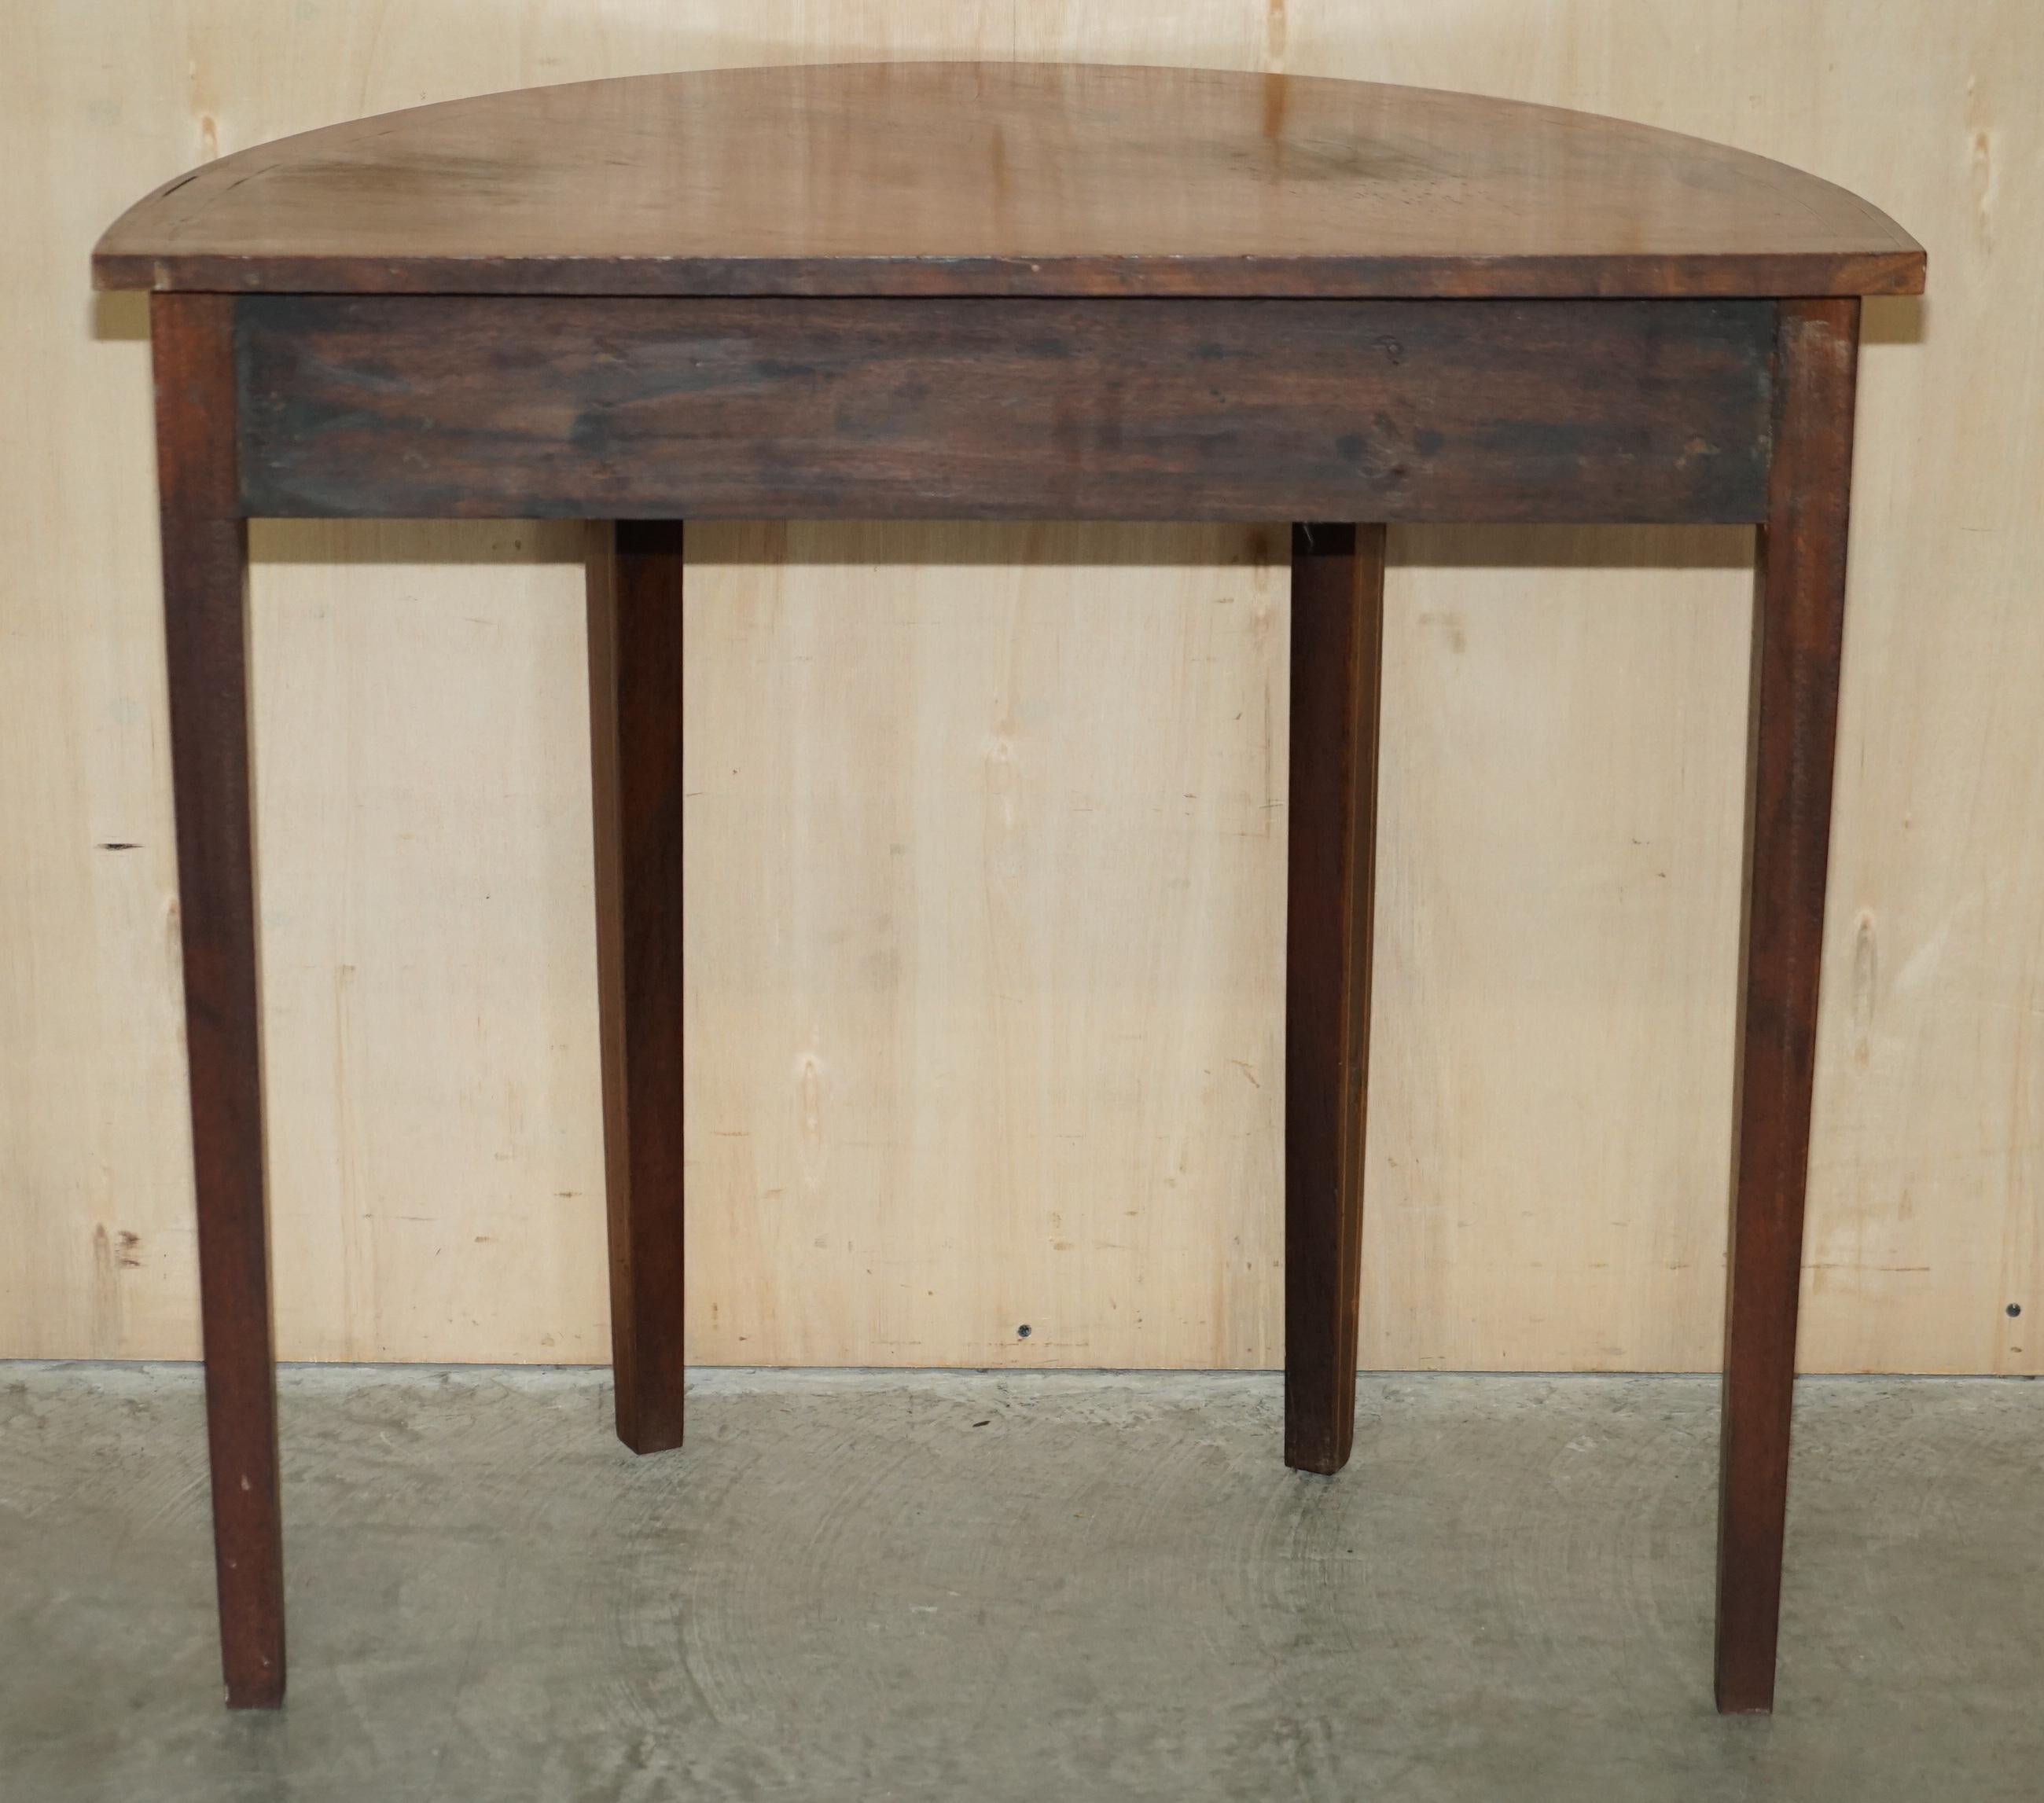 ANTIQUE ViCTORIAN HARDWOOD & WALNUT DEMI LUNE HALF MOON ONE DRAWER CONSOLE TABLE For Sale 3